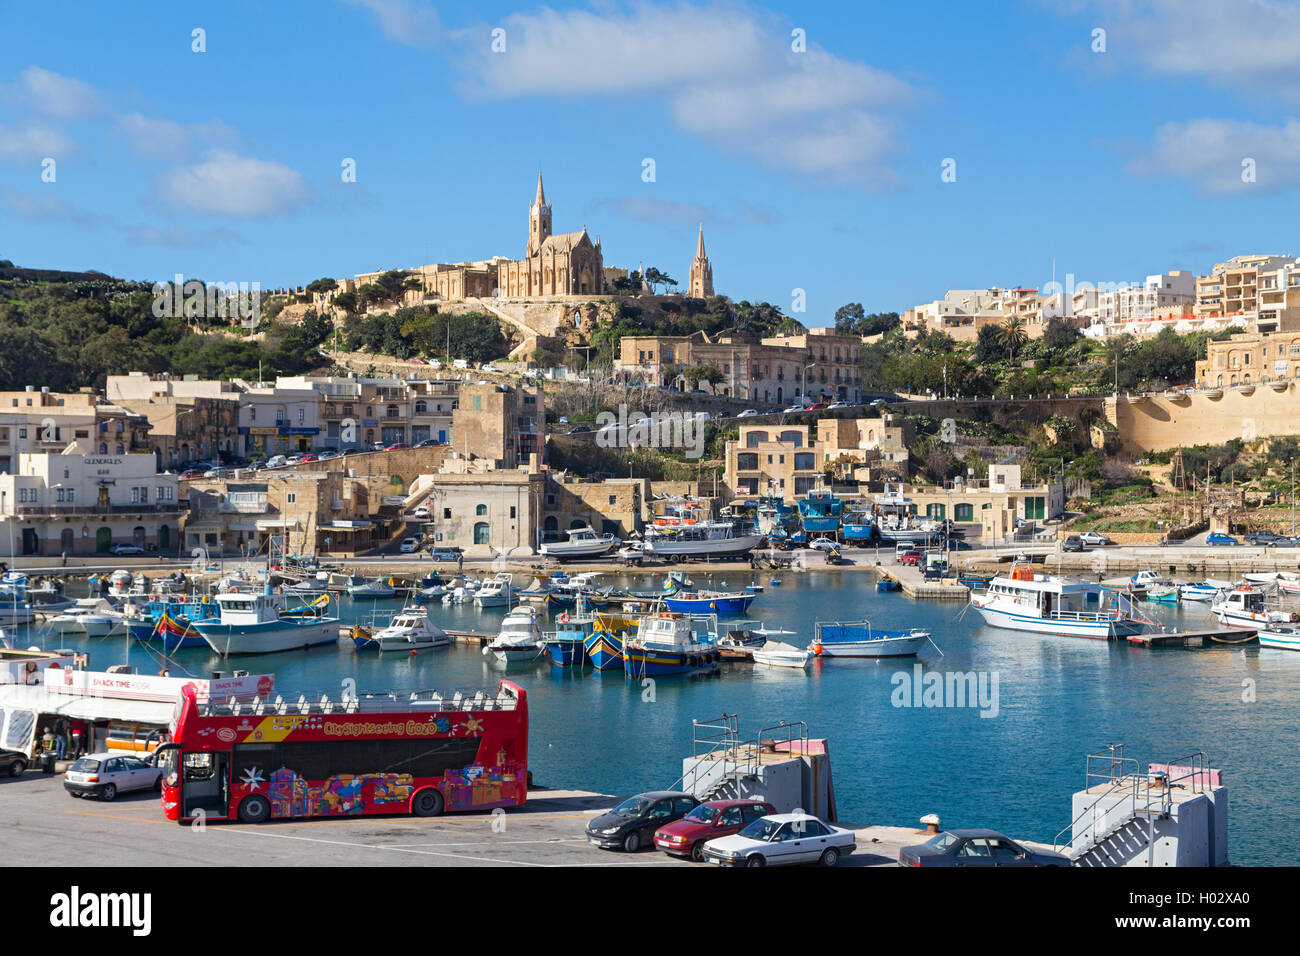 MGARR, MALTA - JANUARY 13, 2015: Mgarr harbour with view of church Our Lady of Lourdes on top of the hill, Gozo island. Stock Photo